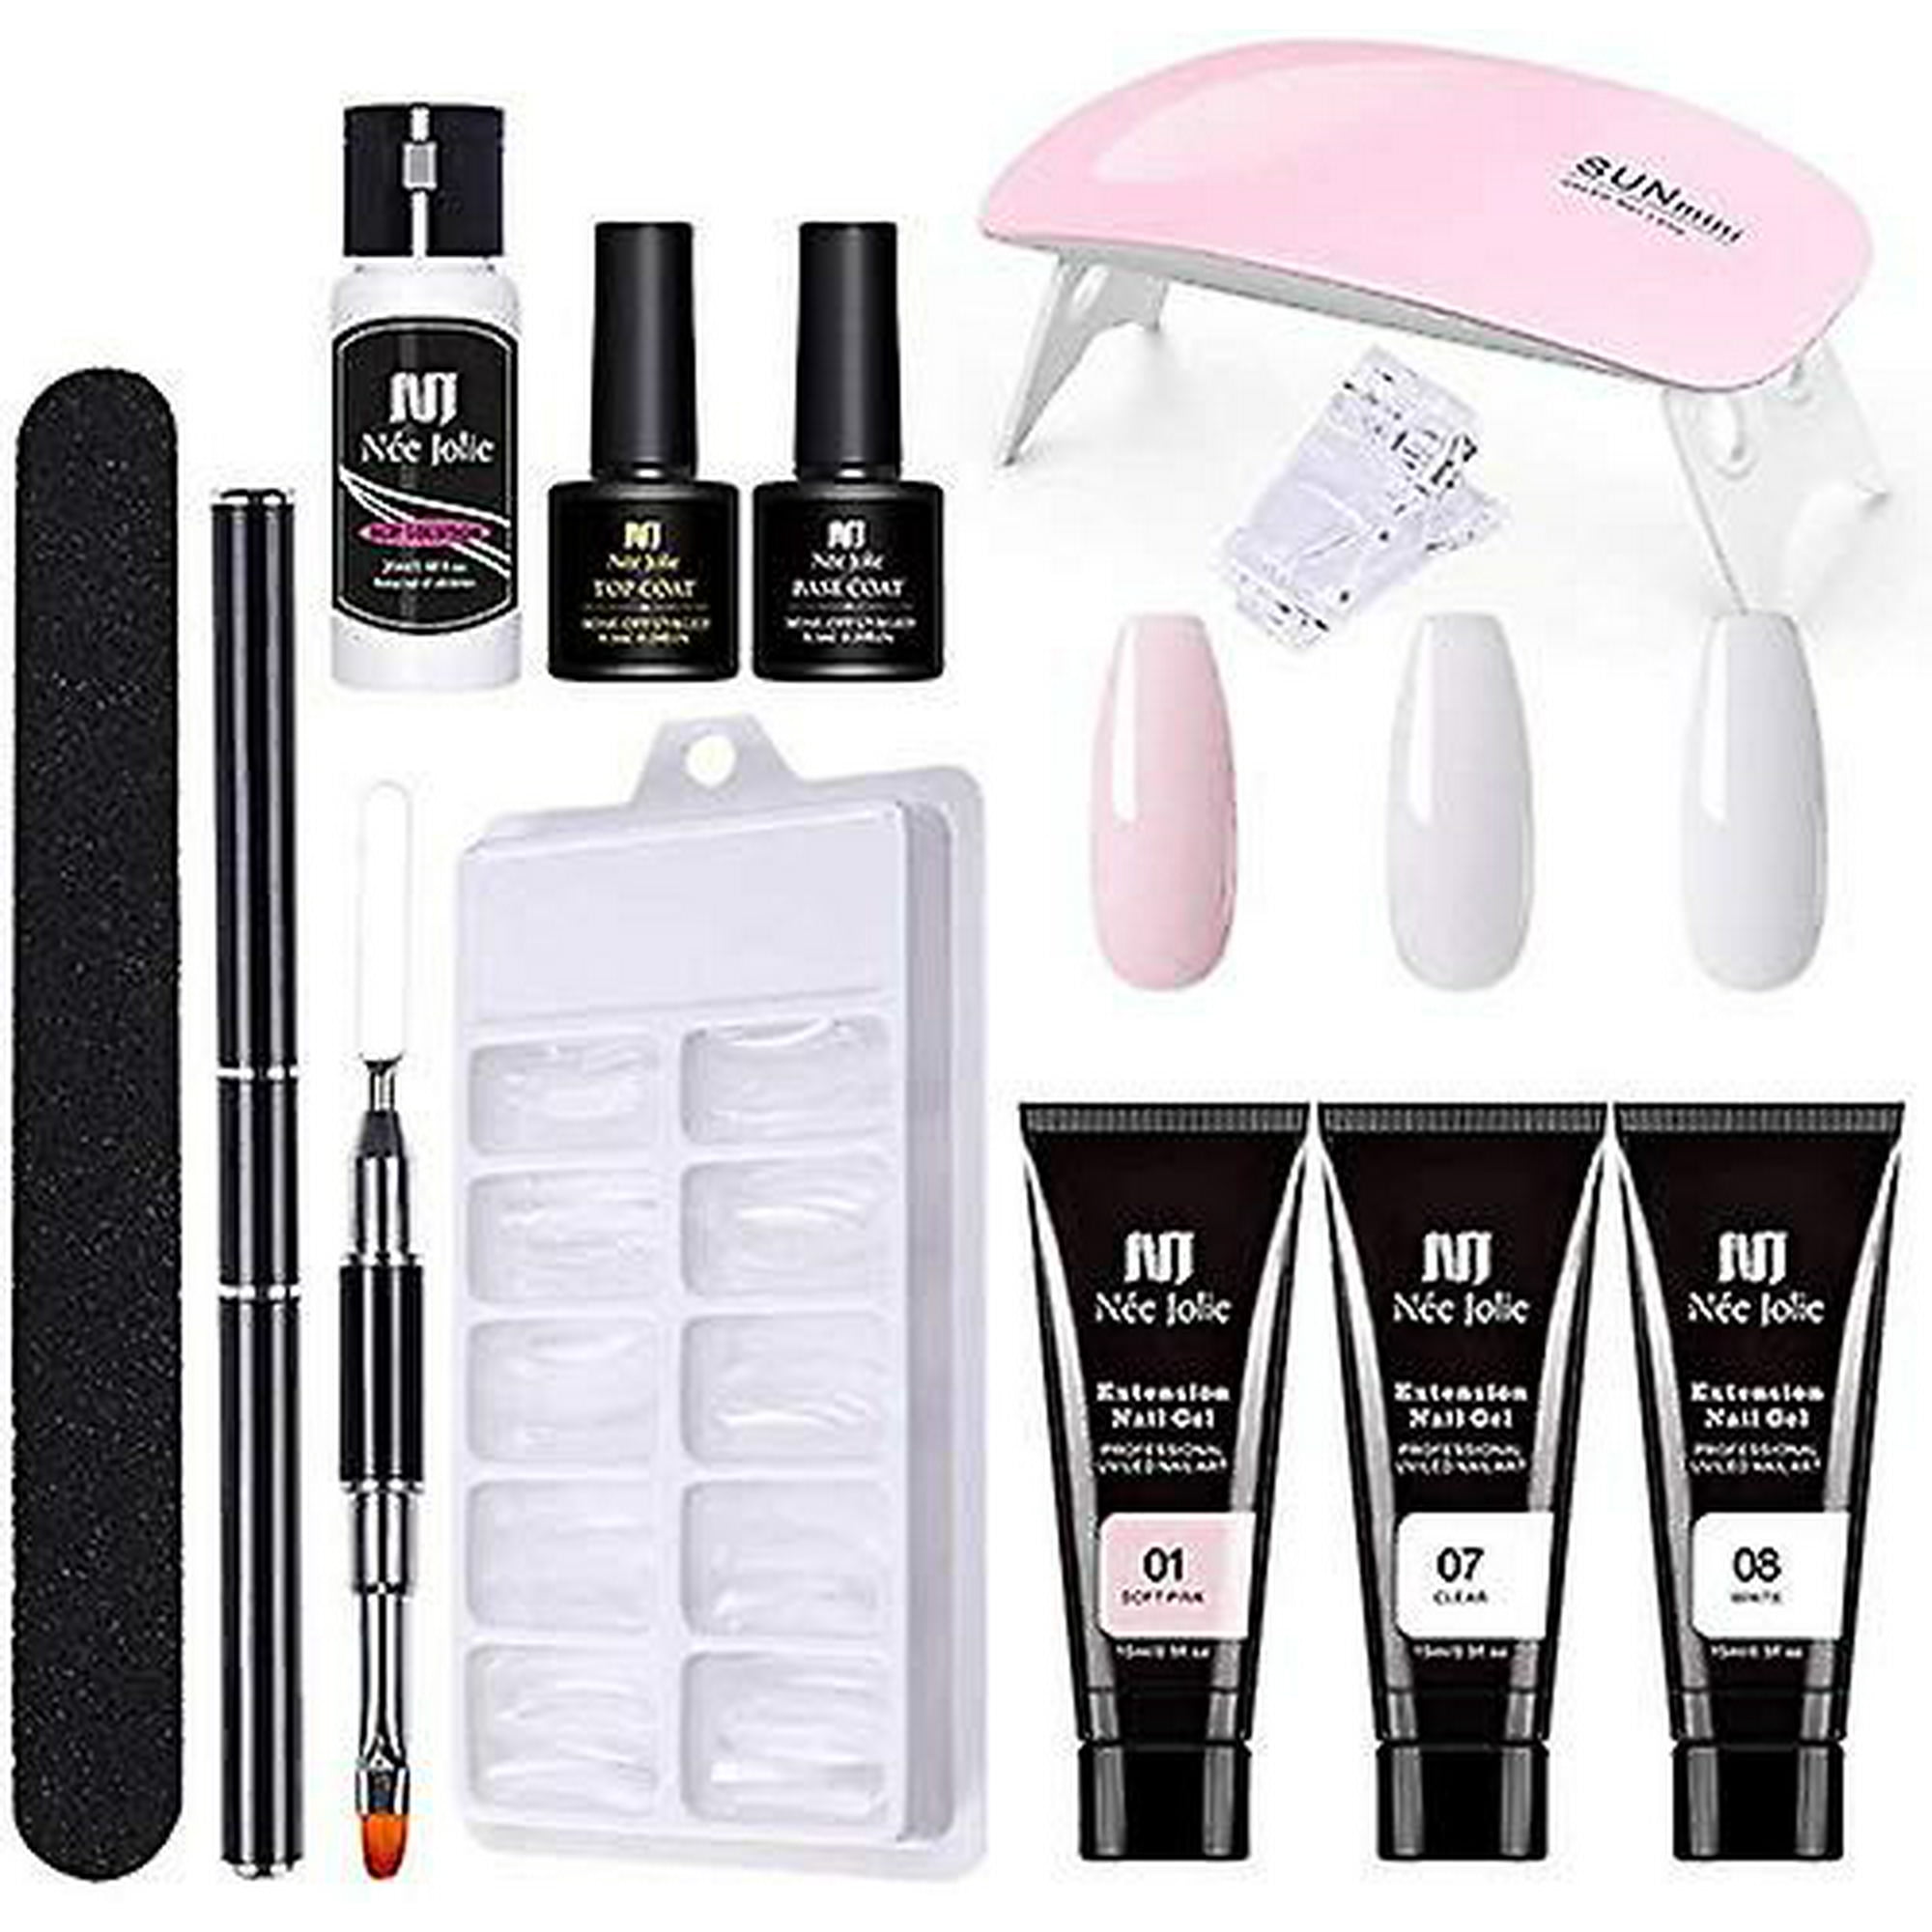 Professional Quick Building Pink Clear Poly Nail Gel Extension Acrylic Kits  With Dryer Buy Professional Nail Kit,8 Pcs/set Poly Nail Gel Kits Nail  Quick Builder Extension Set 30 Ml Uv Nails |